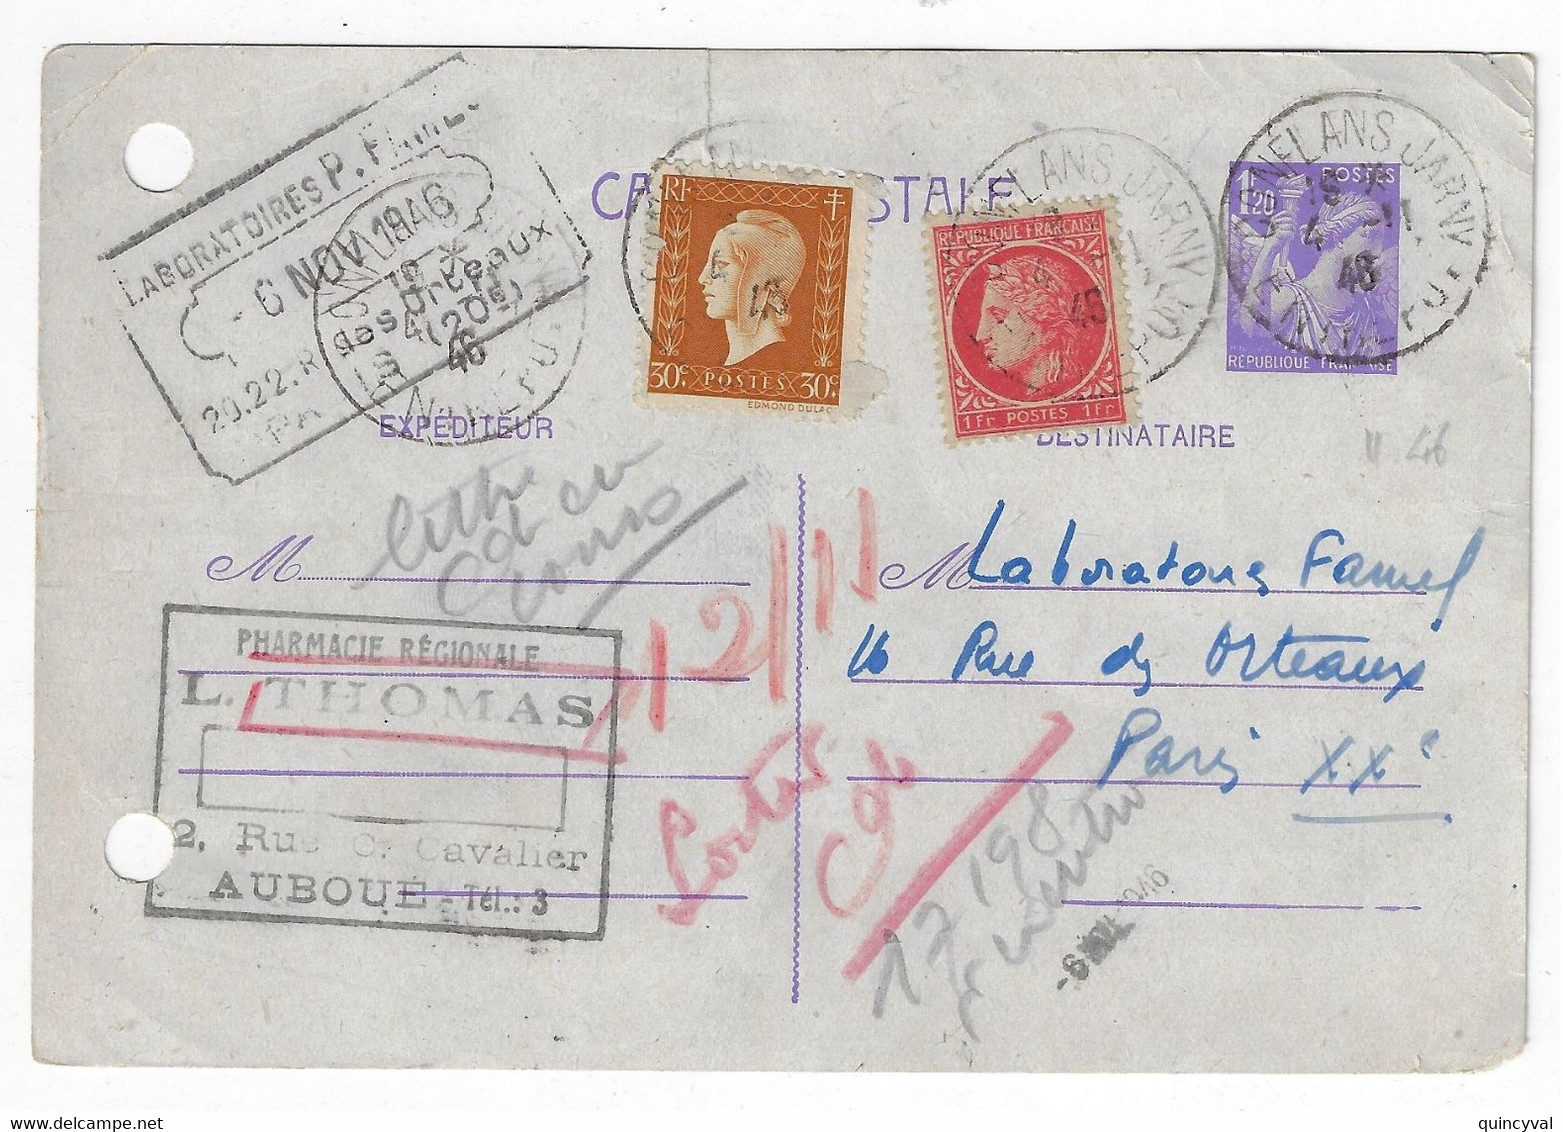 CONFLANS JARNY Carte Postale Entier 1,20 Iris Violet Compl TP 1F Mazelin 30c Dulac Yv 676 683 651-CP1 Ob 1946 - Standard Postcards & Stamped On Demand (before 1995)